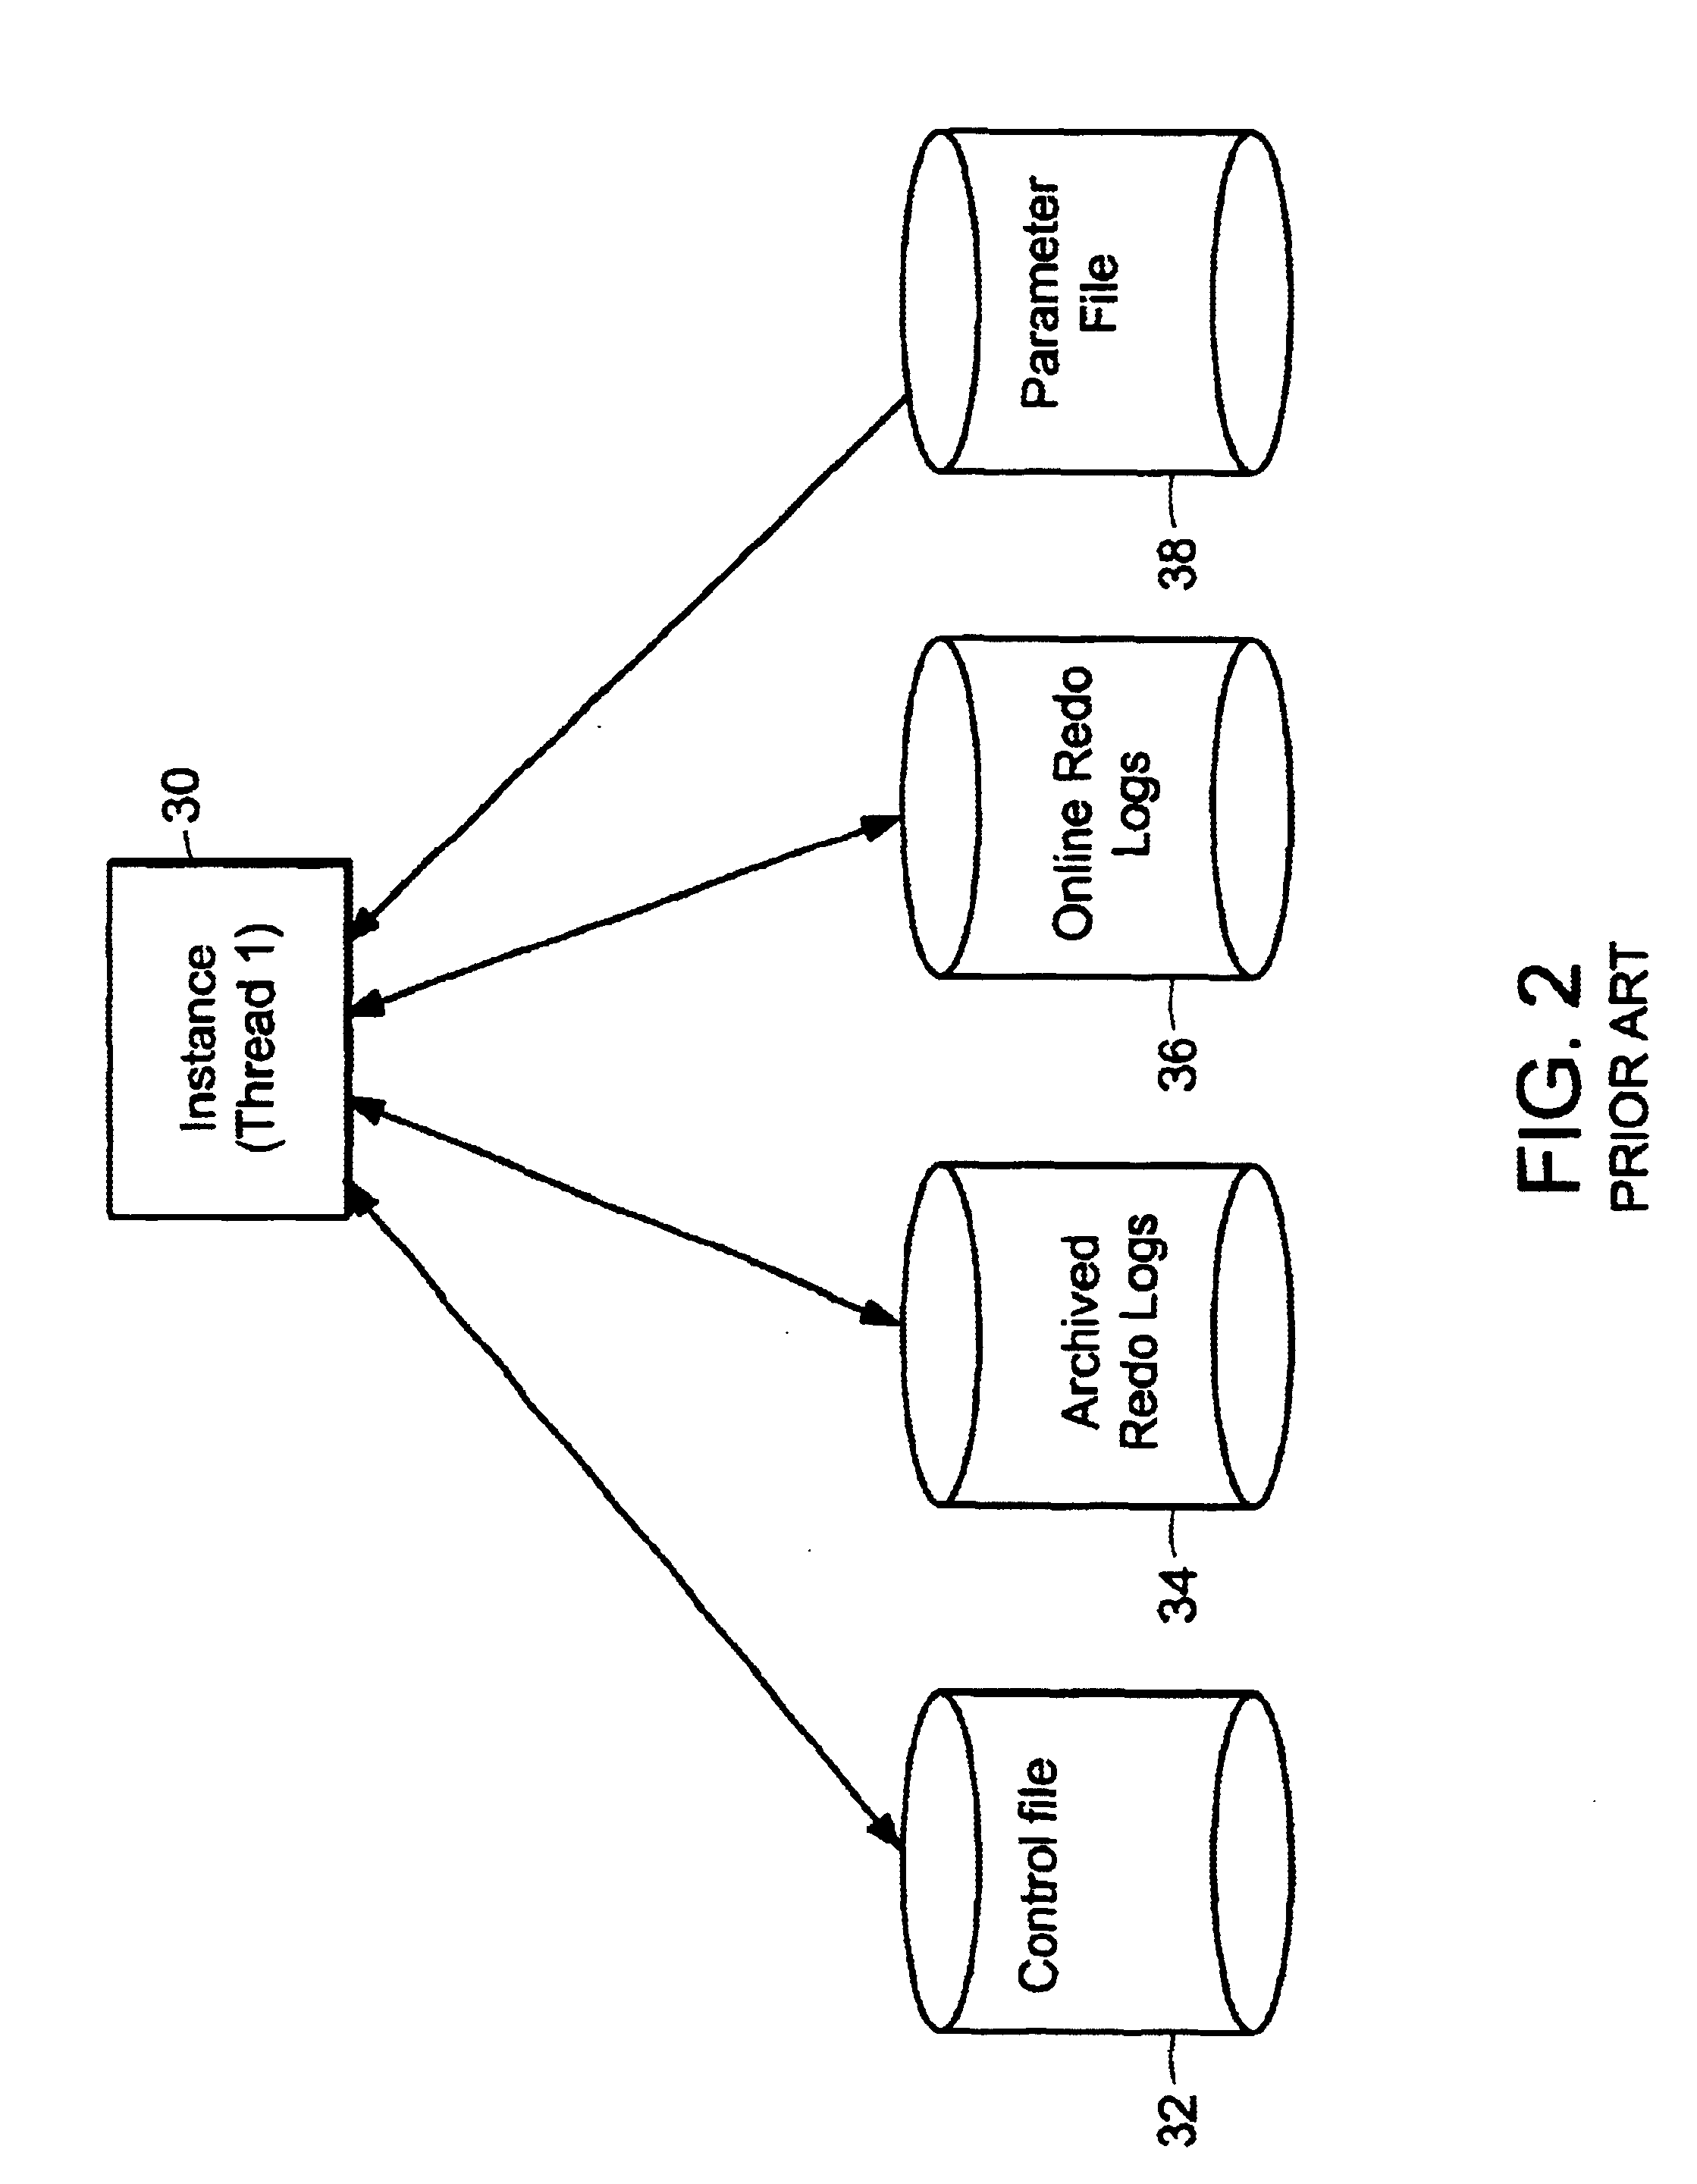 System and method for backup a parallel server data storage system